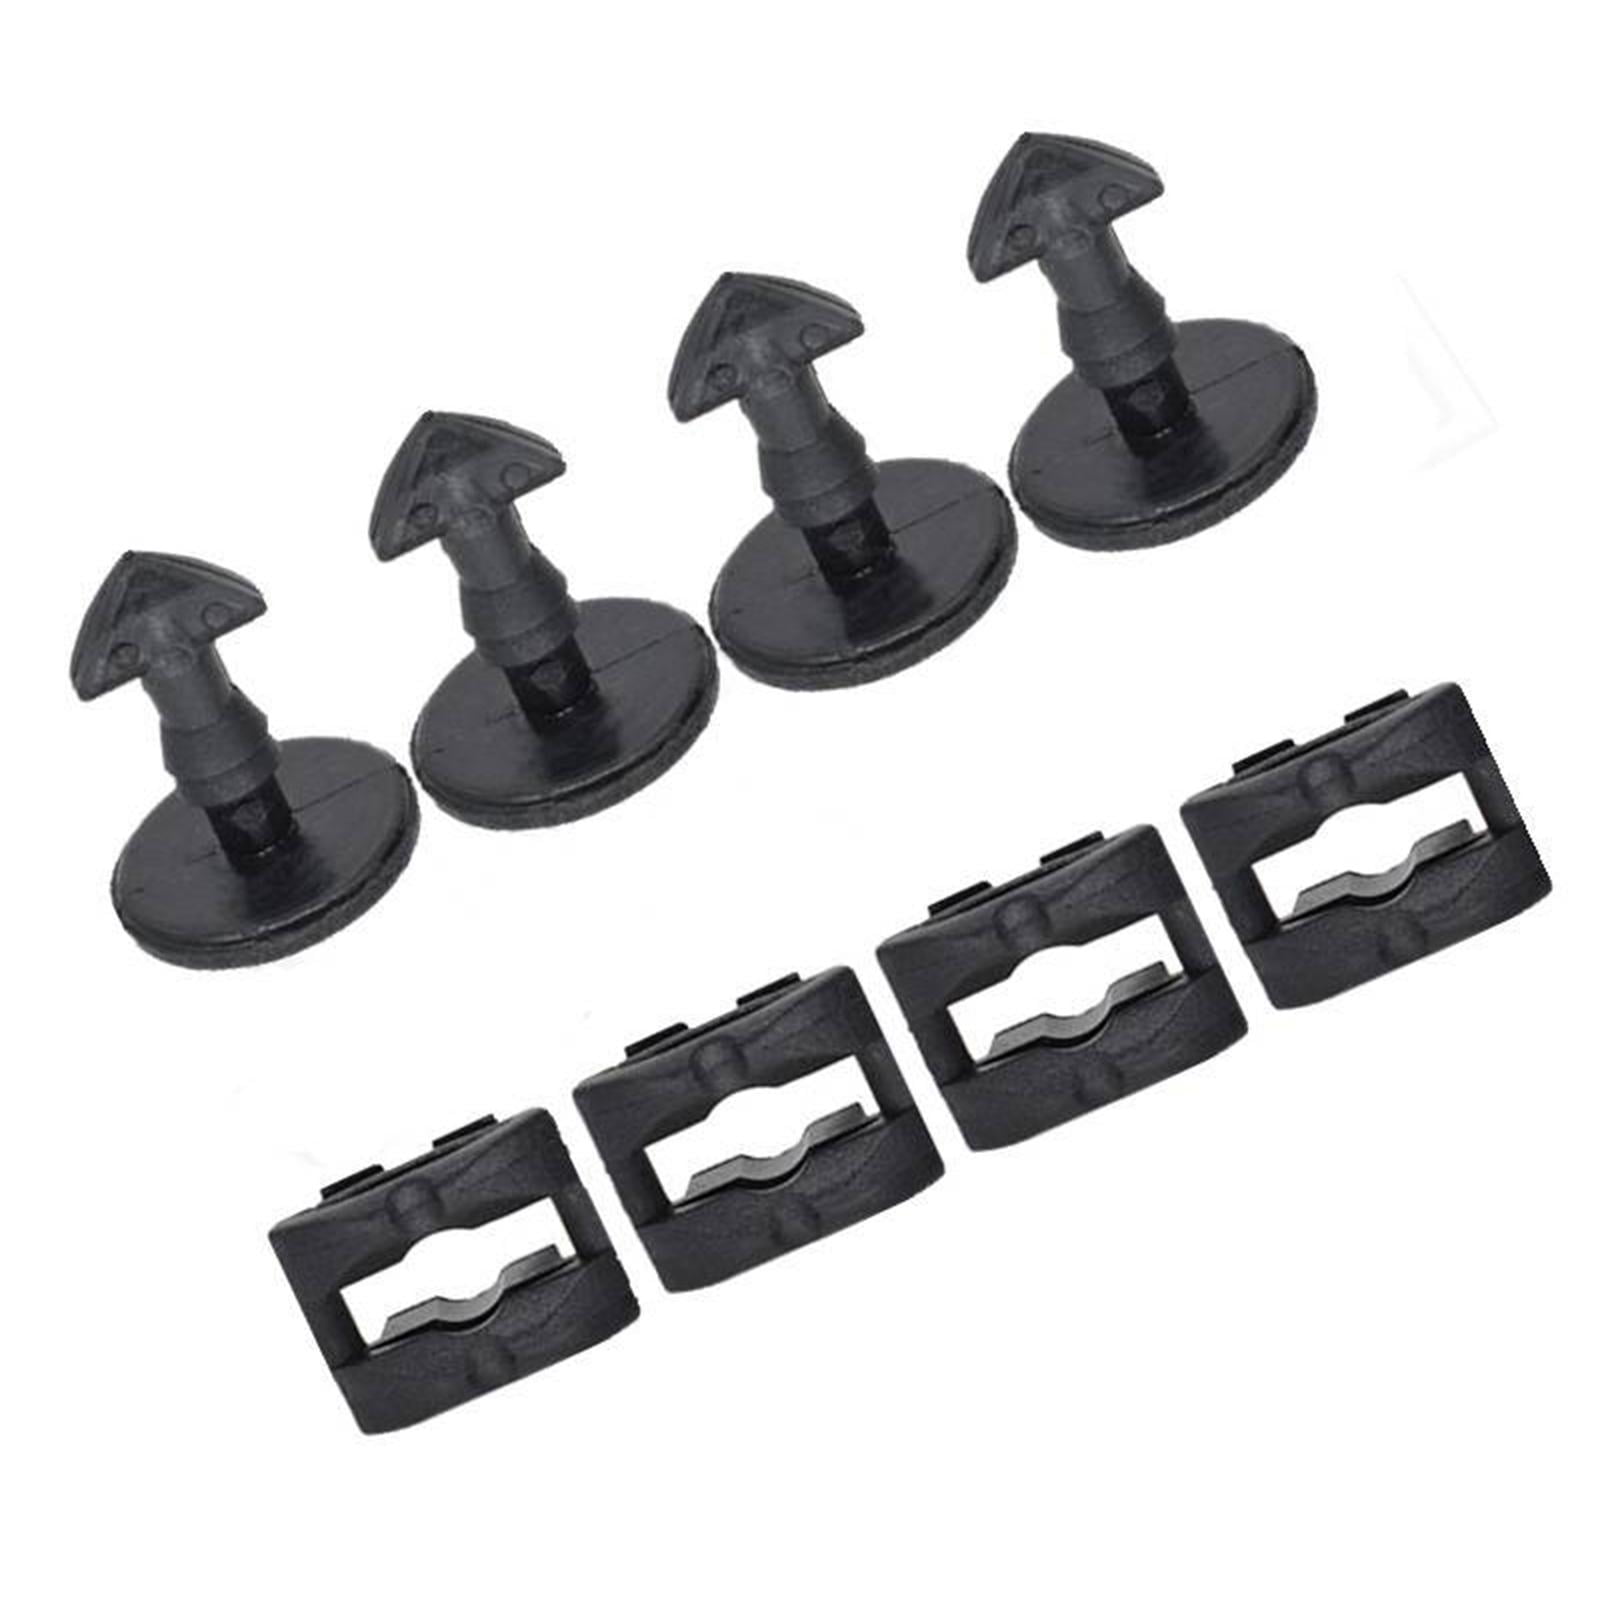 4Pcs Rear Bumper Tow Cover Clips Retainers for Discovery 3 4 Style C ...